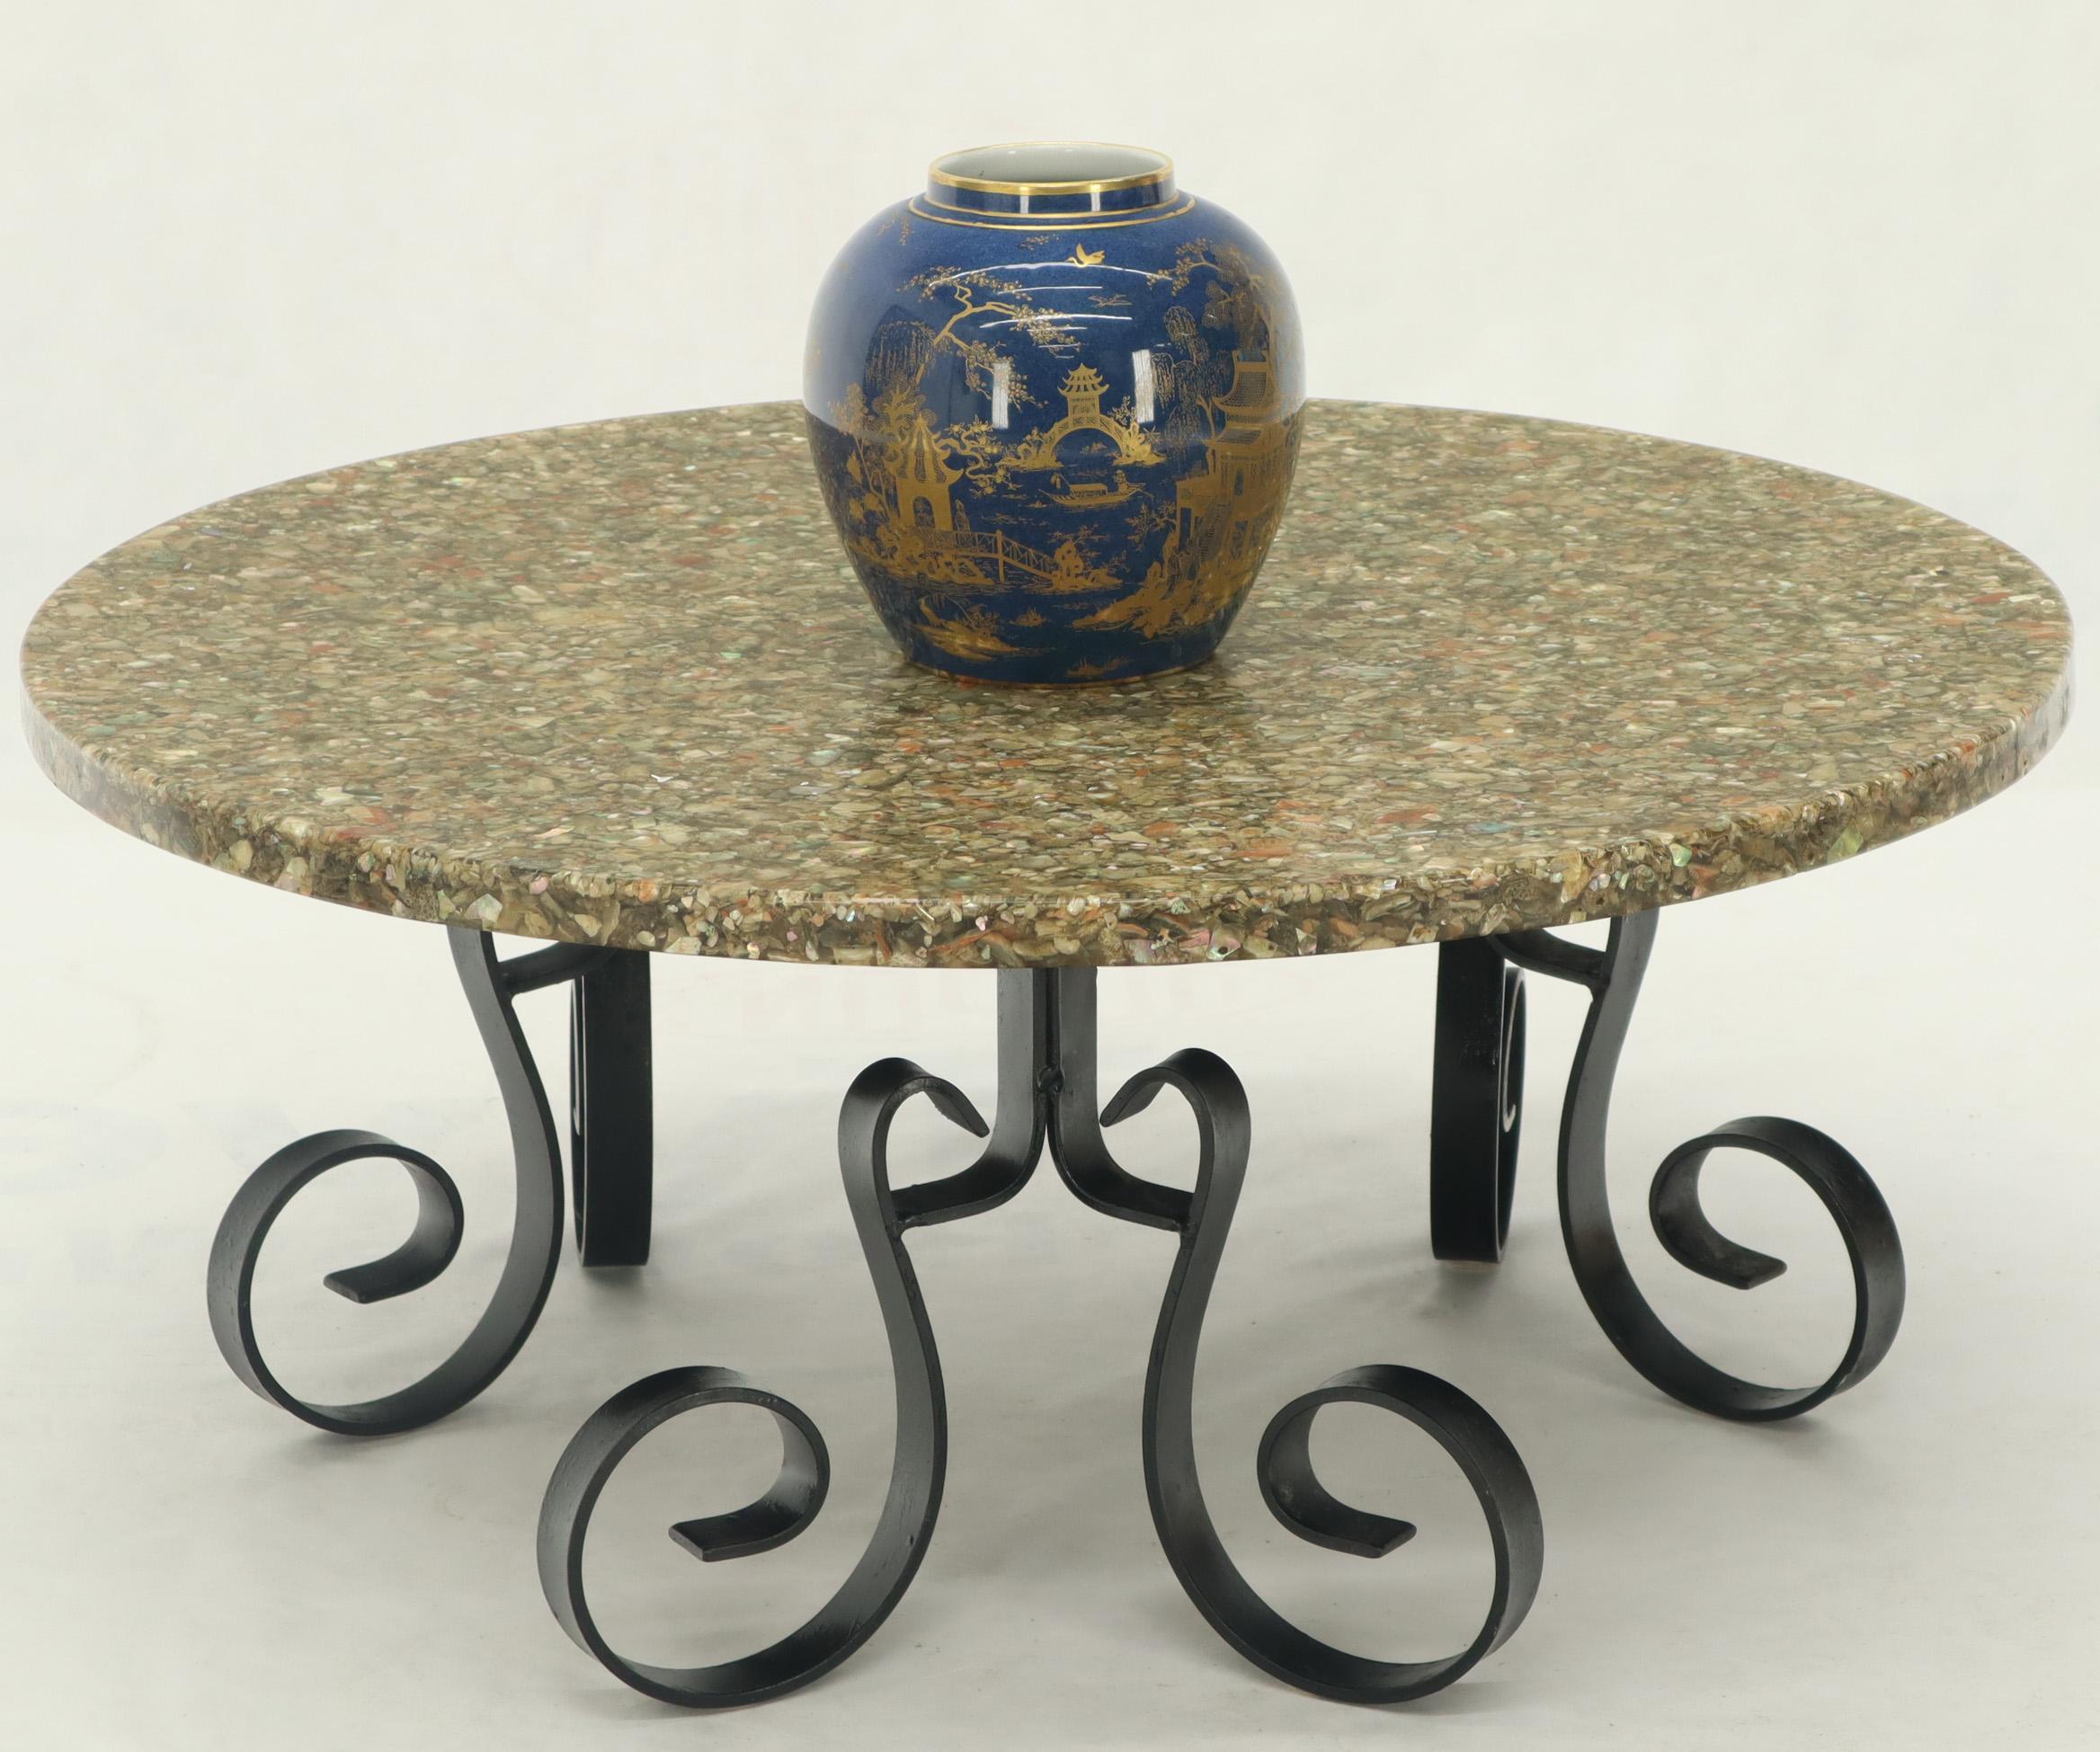 Wrought Iron Base Abalone Composite Round Top Coffee Table In Excellent Condition For Sale In Rockaway, NJ